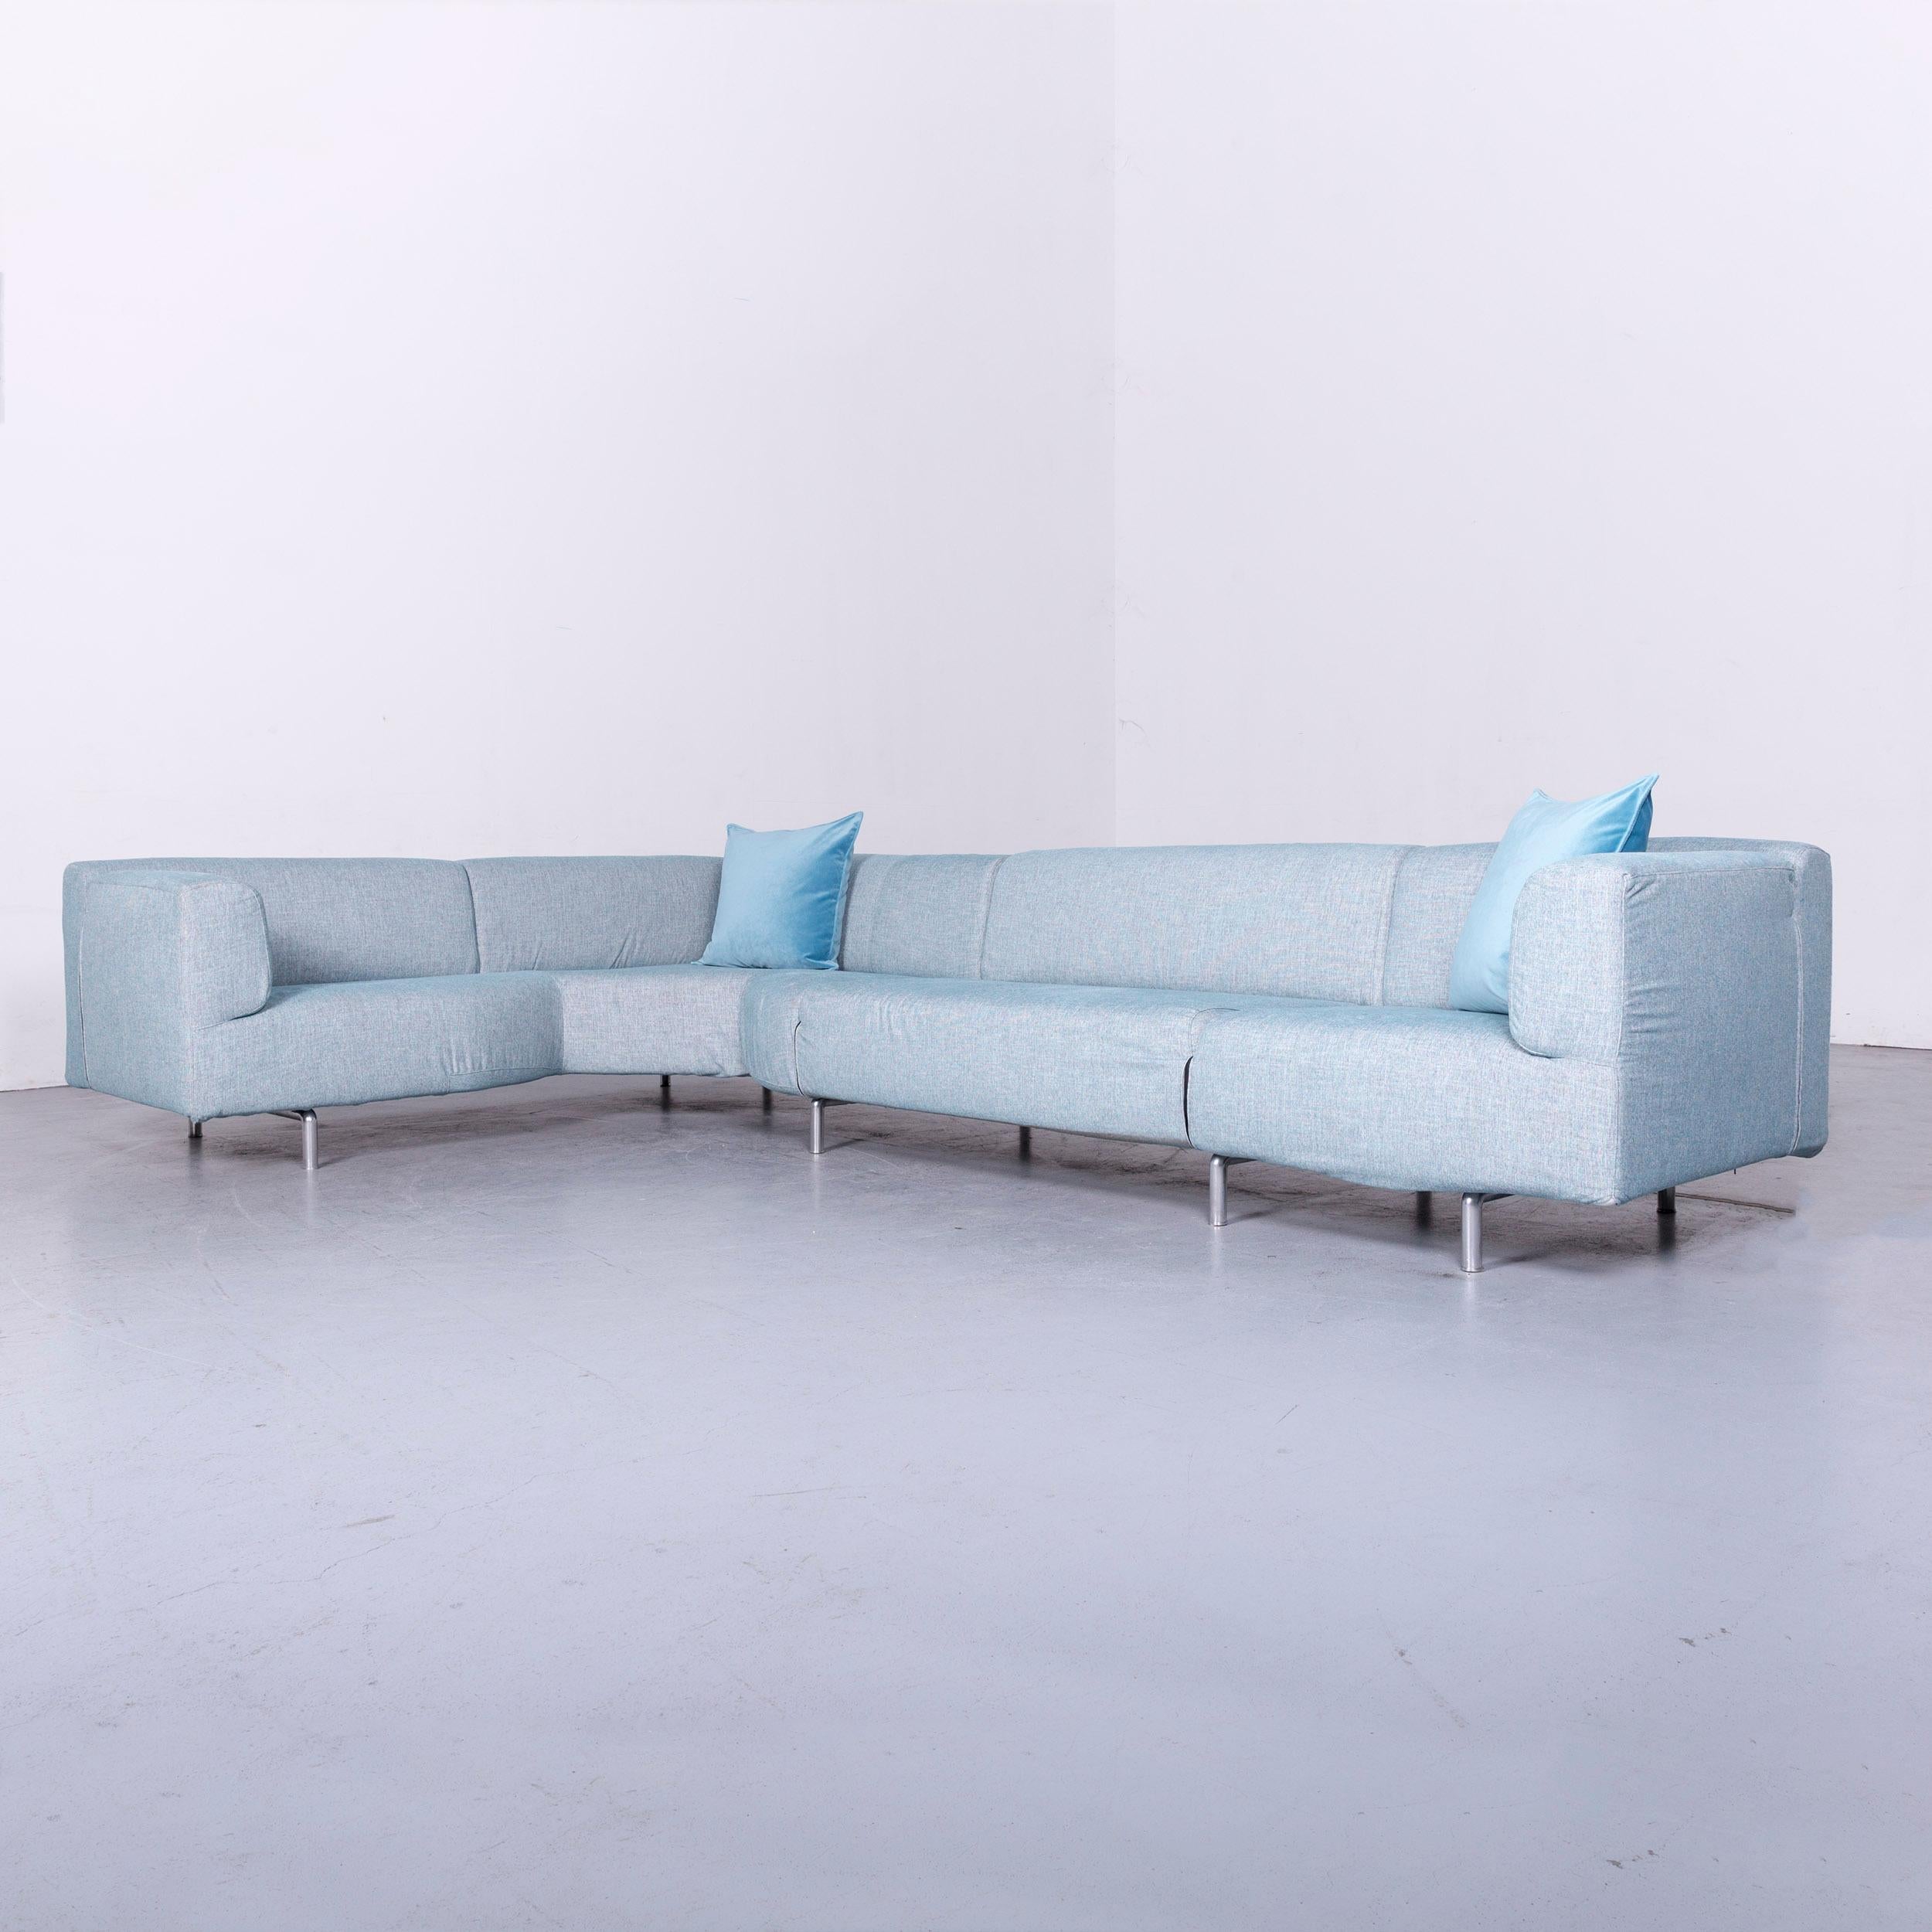 We bring to you a Cassina met designer corner sofa couch blue fabric.